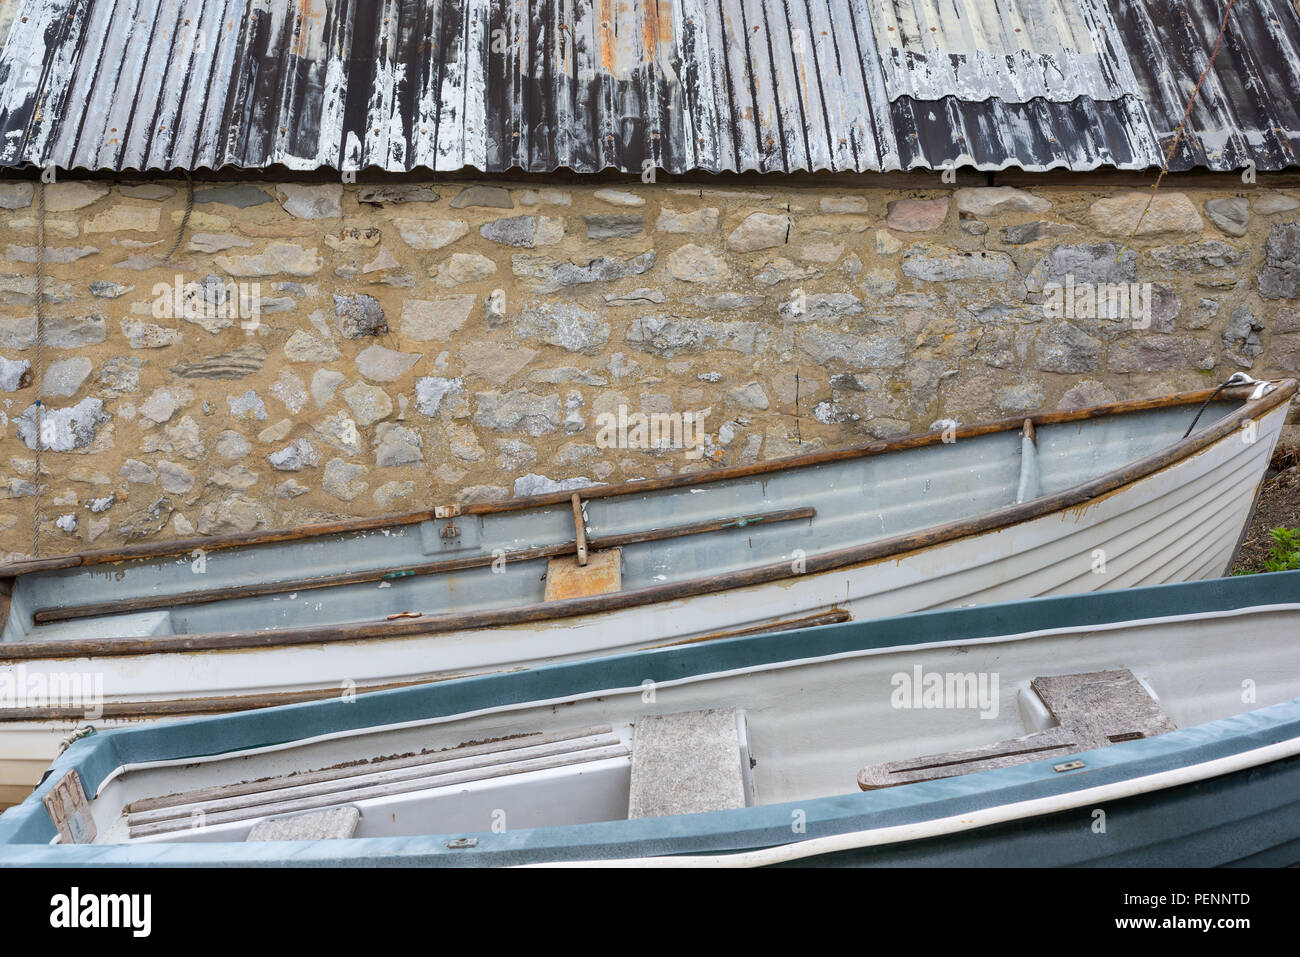 Rowing boats beside a boat shed with a corrugated iron roof on the wild beach of Chapman's Pool, Jurassic Coast, Purbeck, Dorset, England, UK Stock Photo